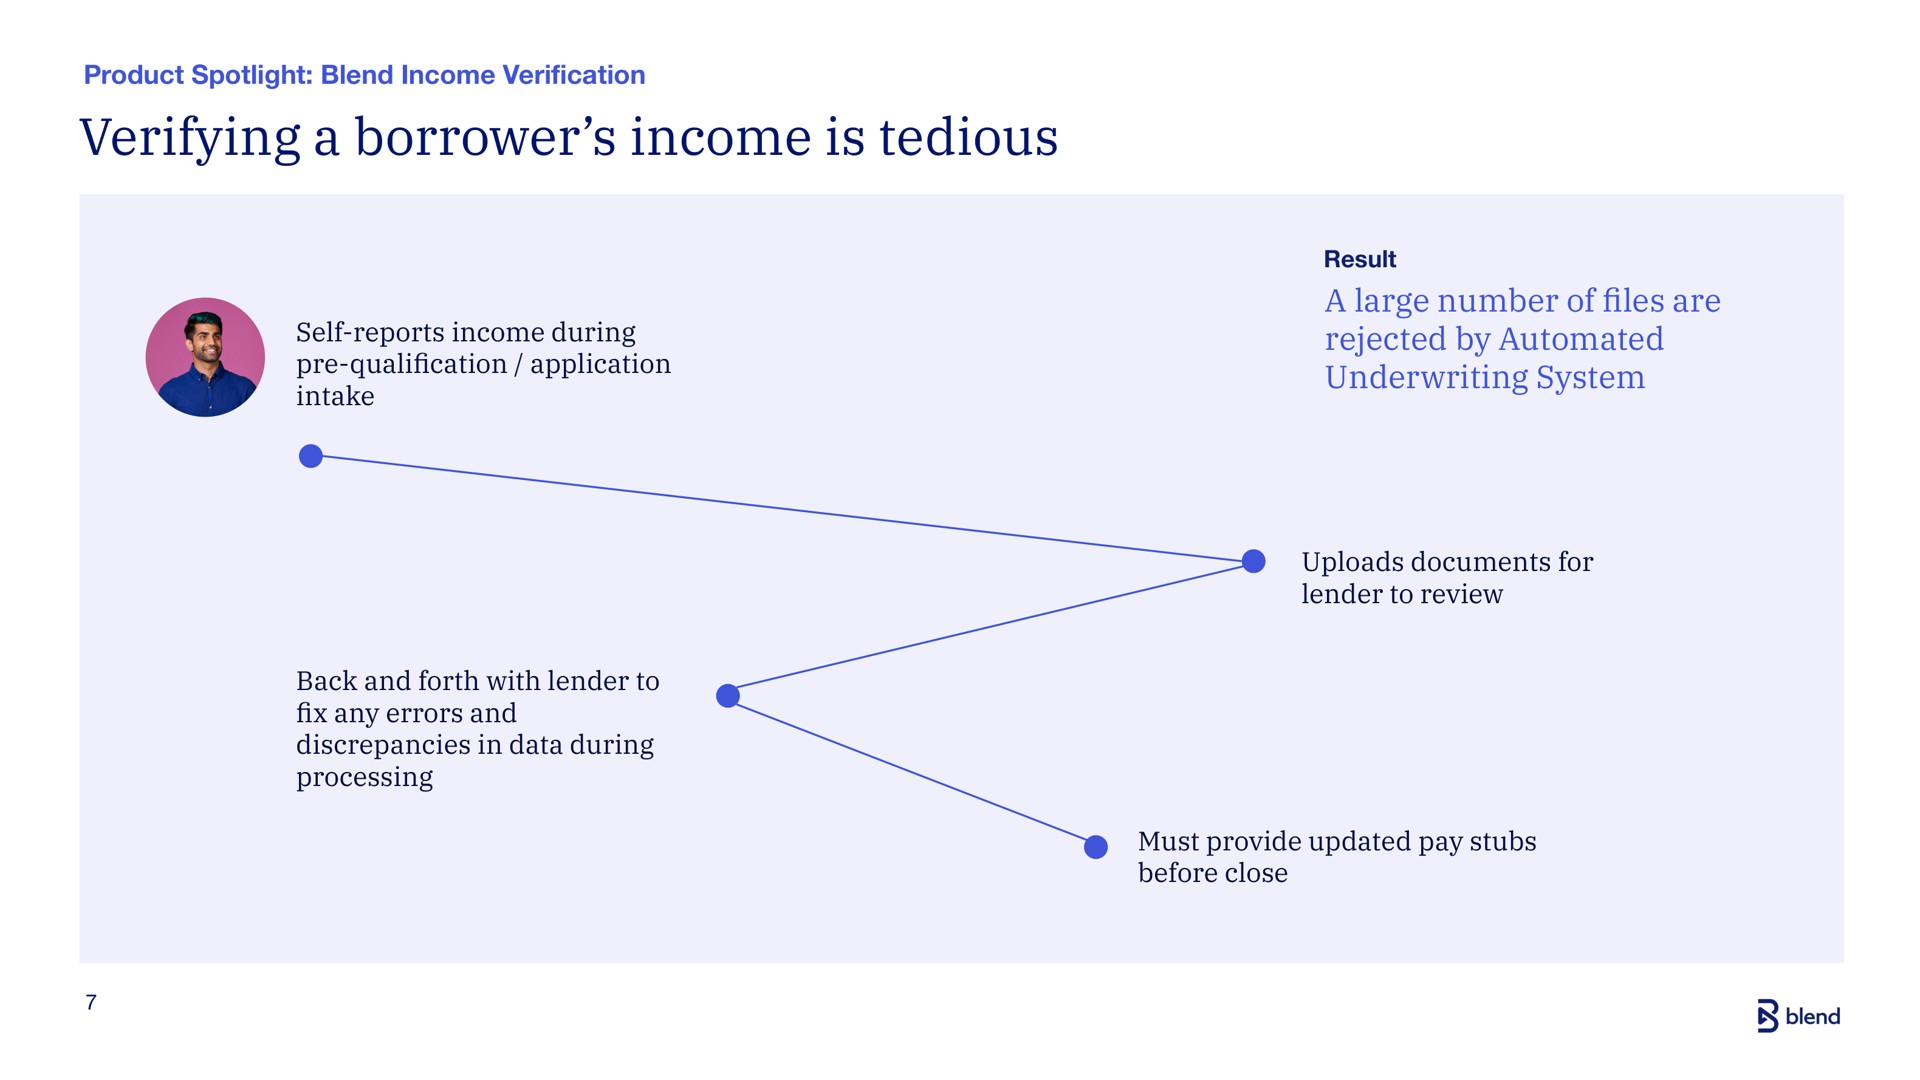 verifying a borrower income is tedious | Blend